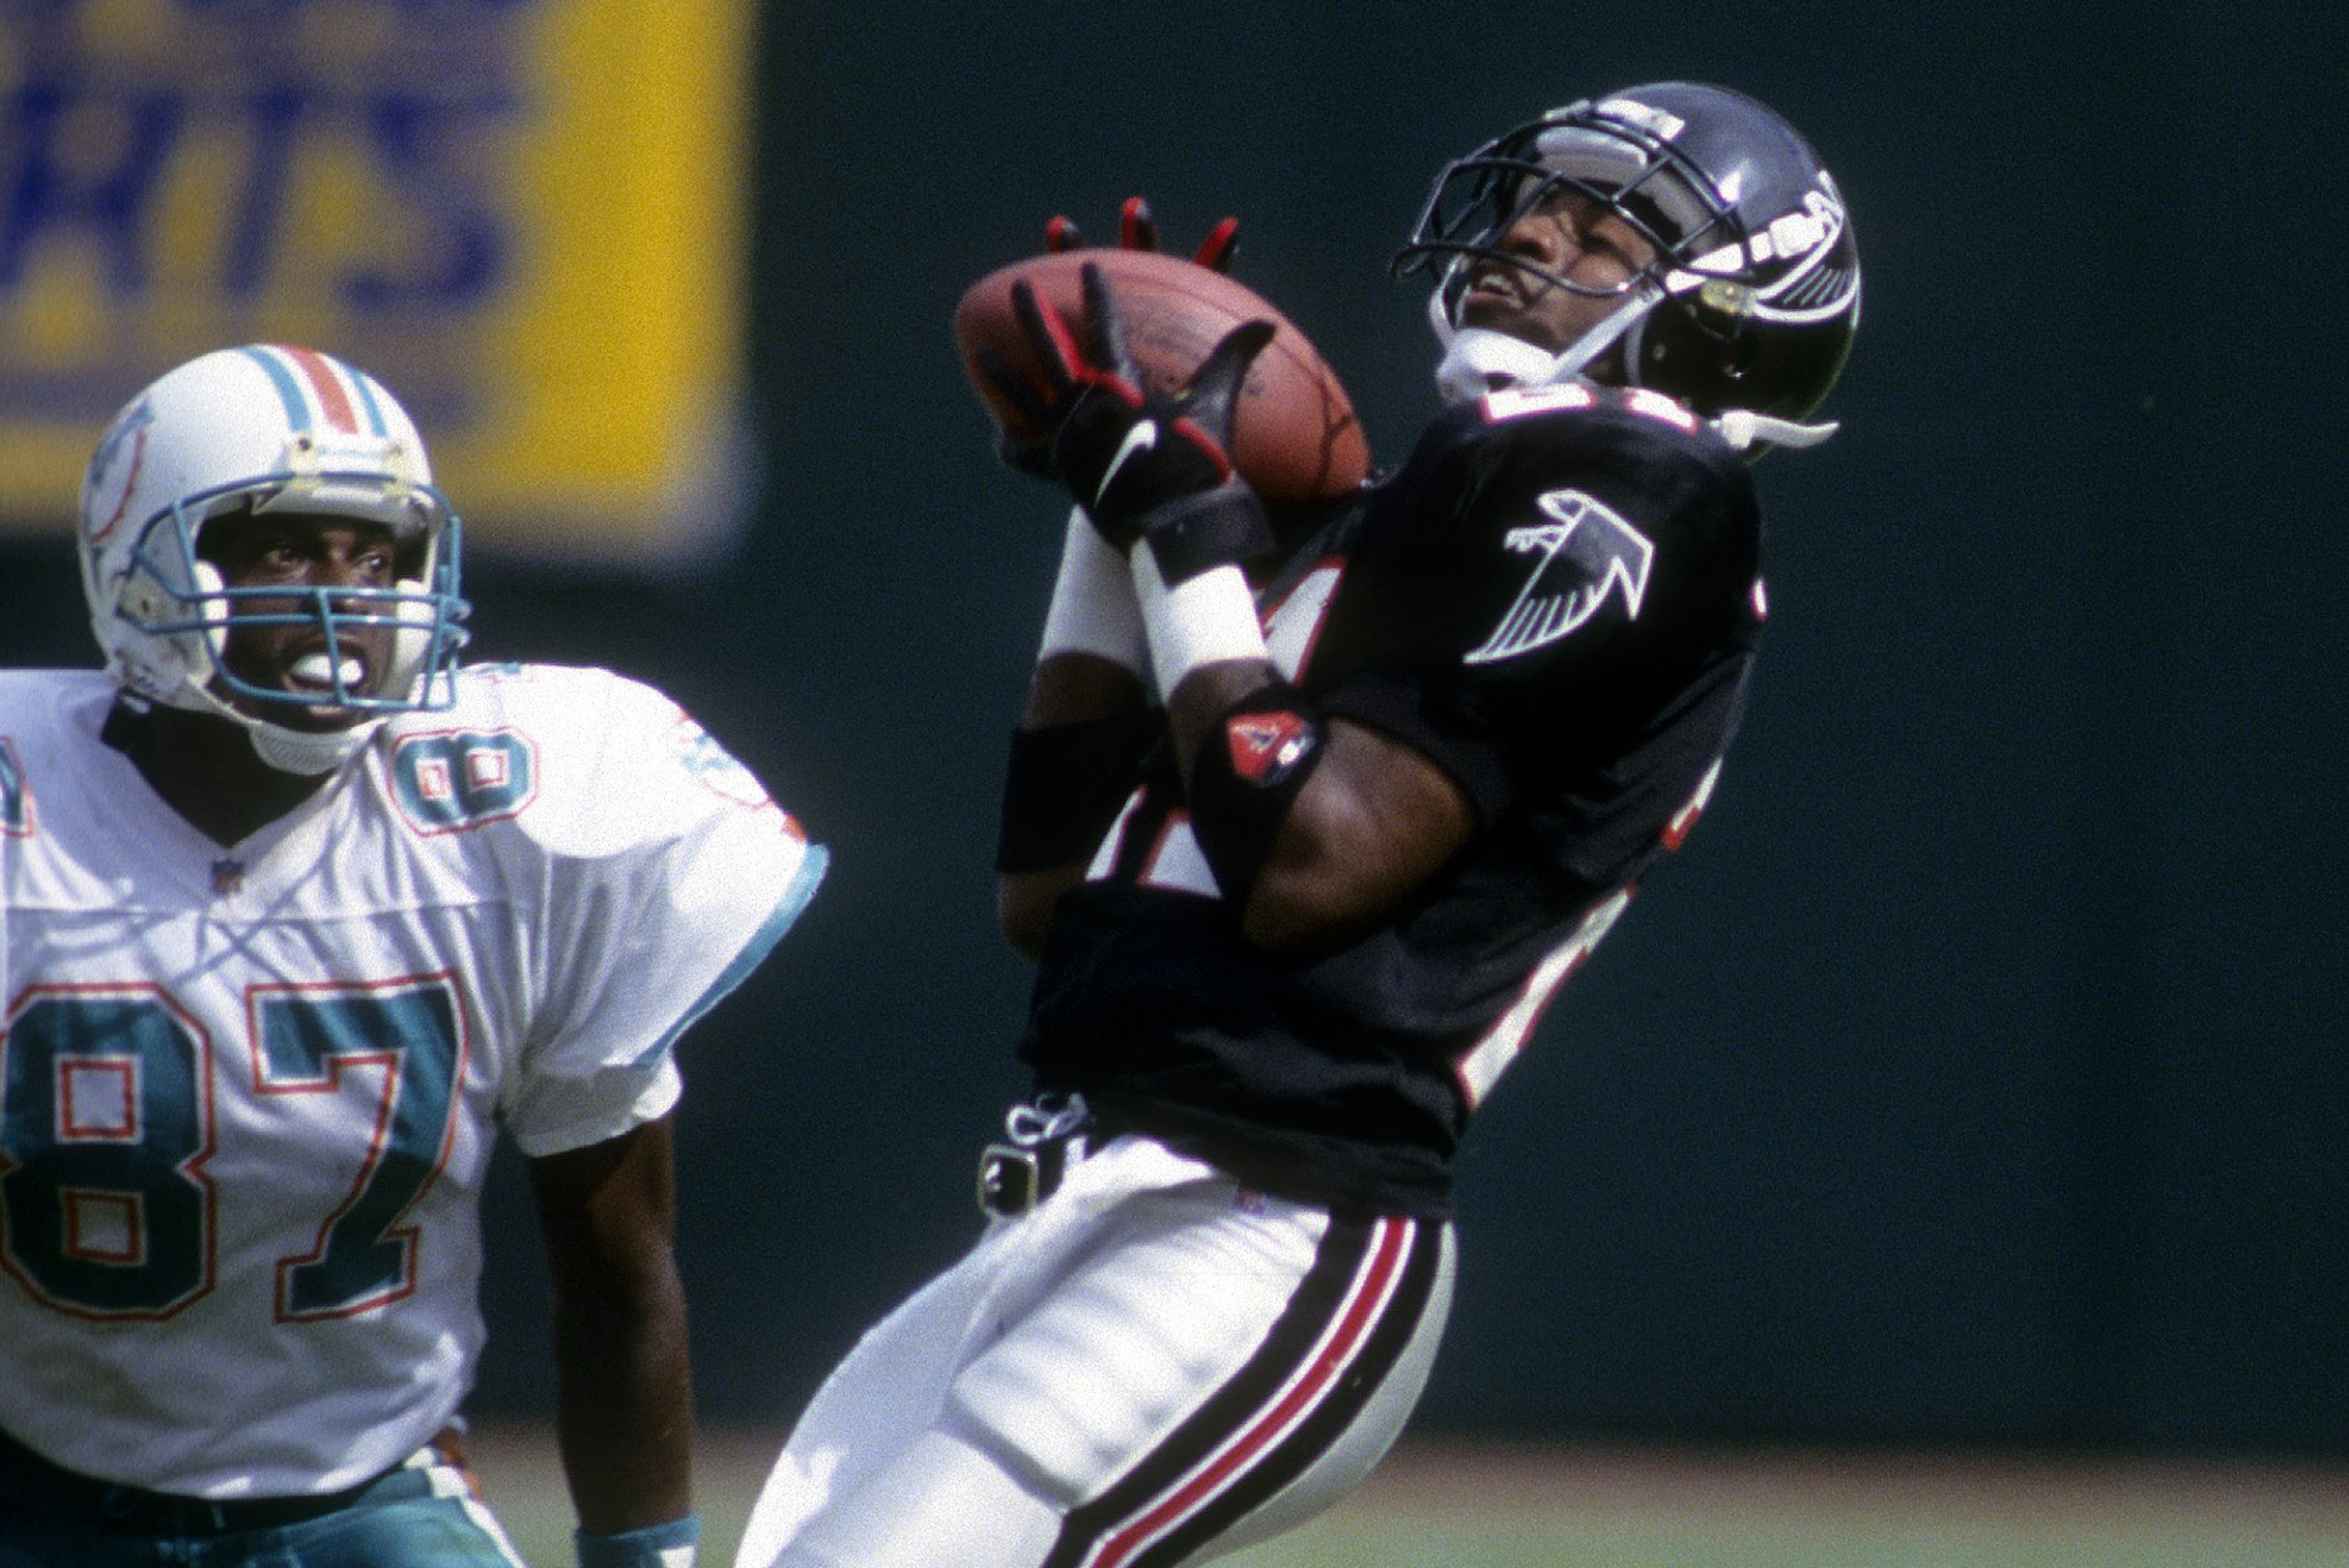 The Day Deion Did Both: 25 Years Ago, Prime Time Suited Up for 2